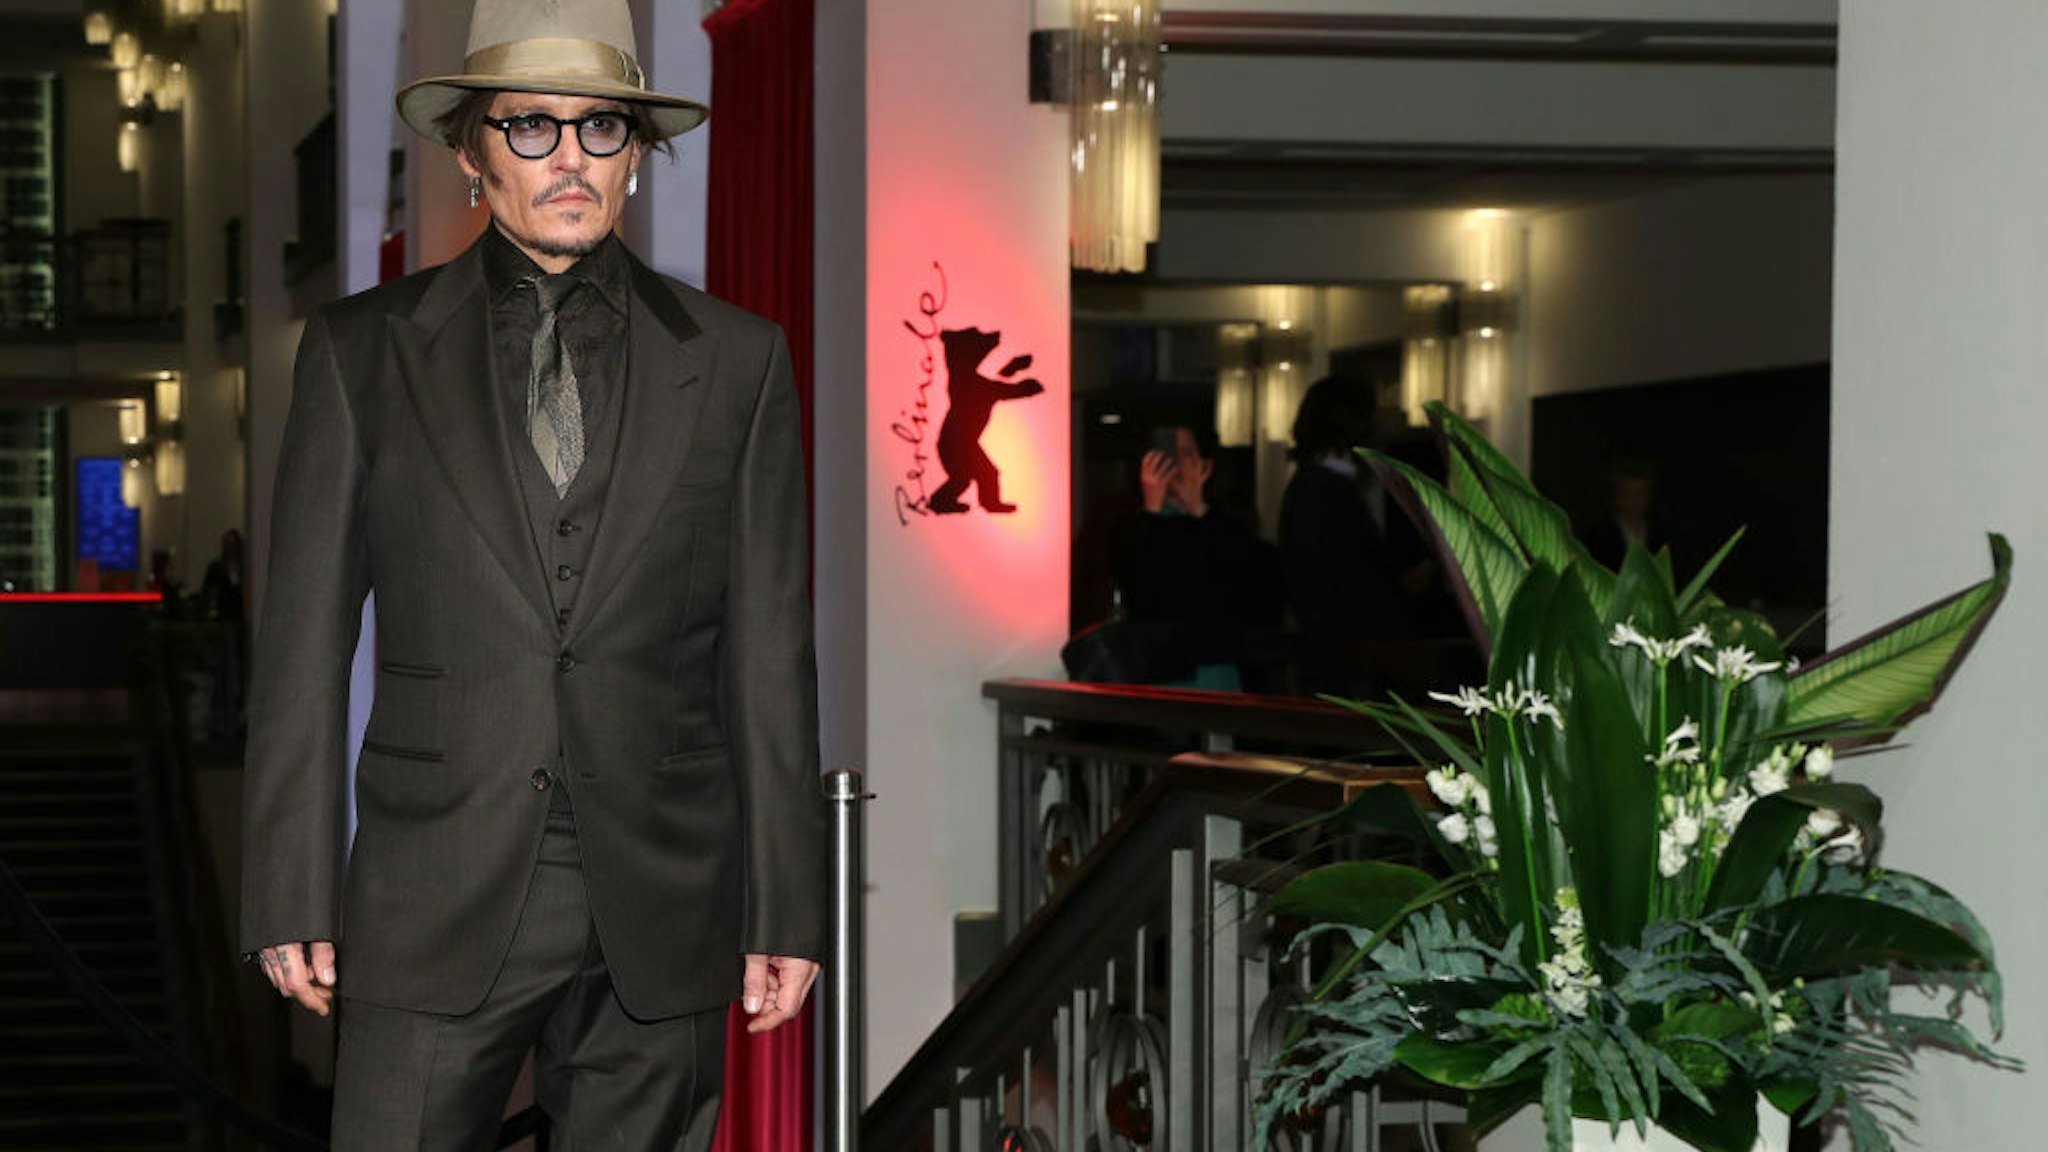 Johnny Depp arrives for the "Minamata" premiere during the 70th Berlinale International Film Festival Berlin at Friedrichstadt-Palast on February 21, 2020 in Berlin, Germany.